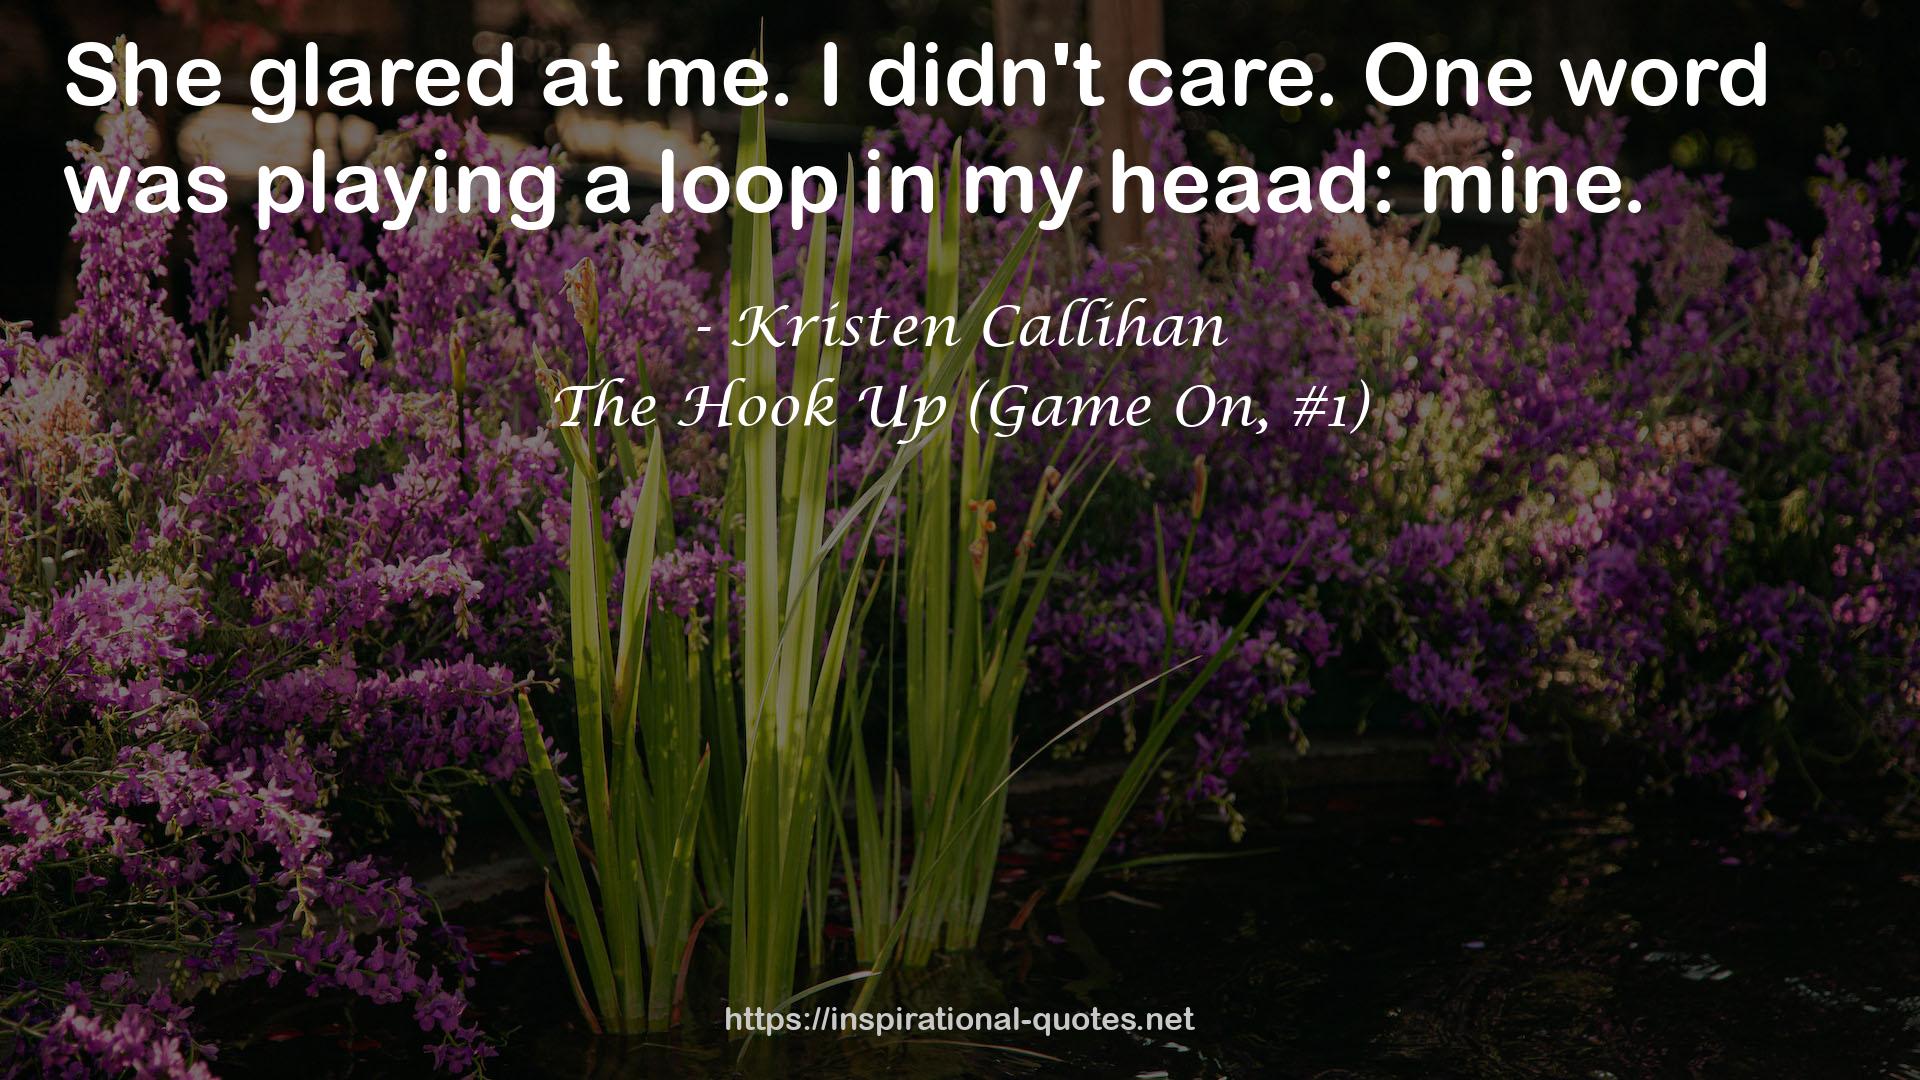 The Hook Up (Game On, #1) QUOTES